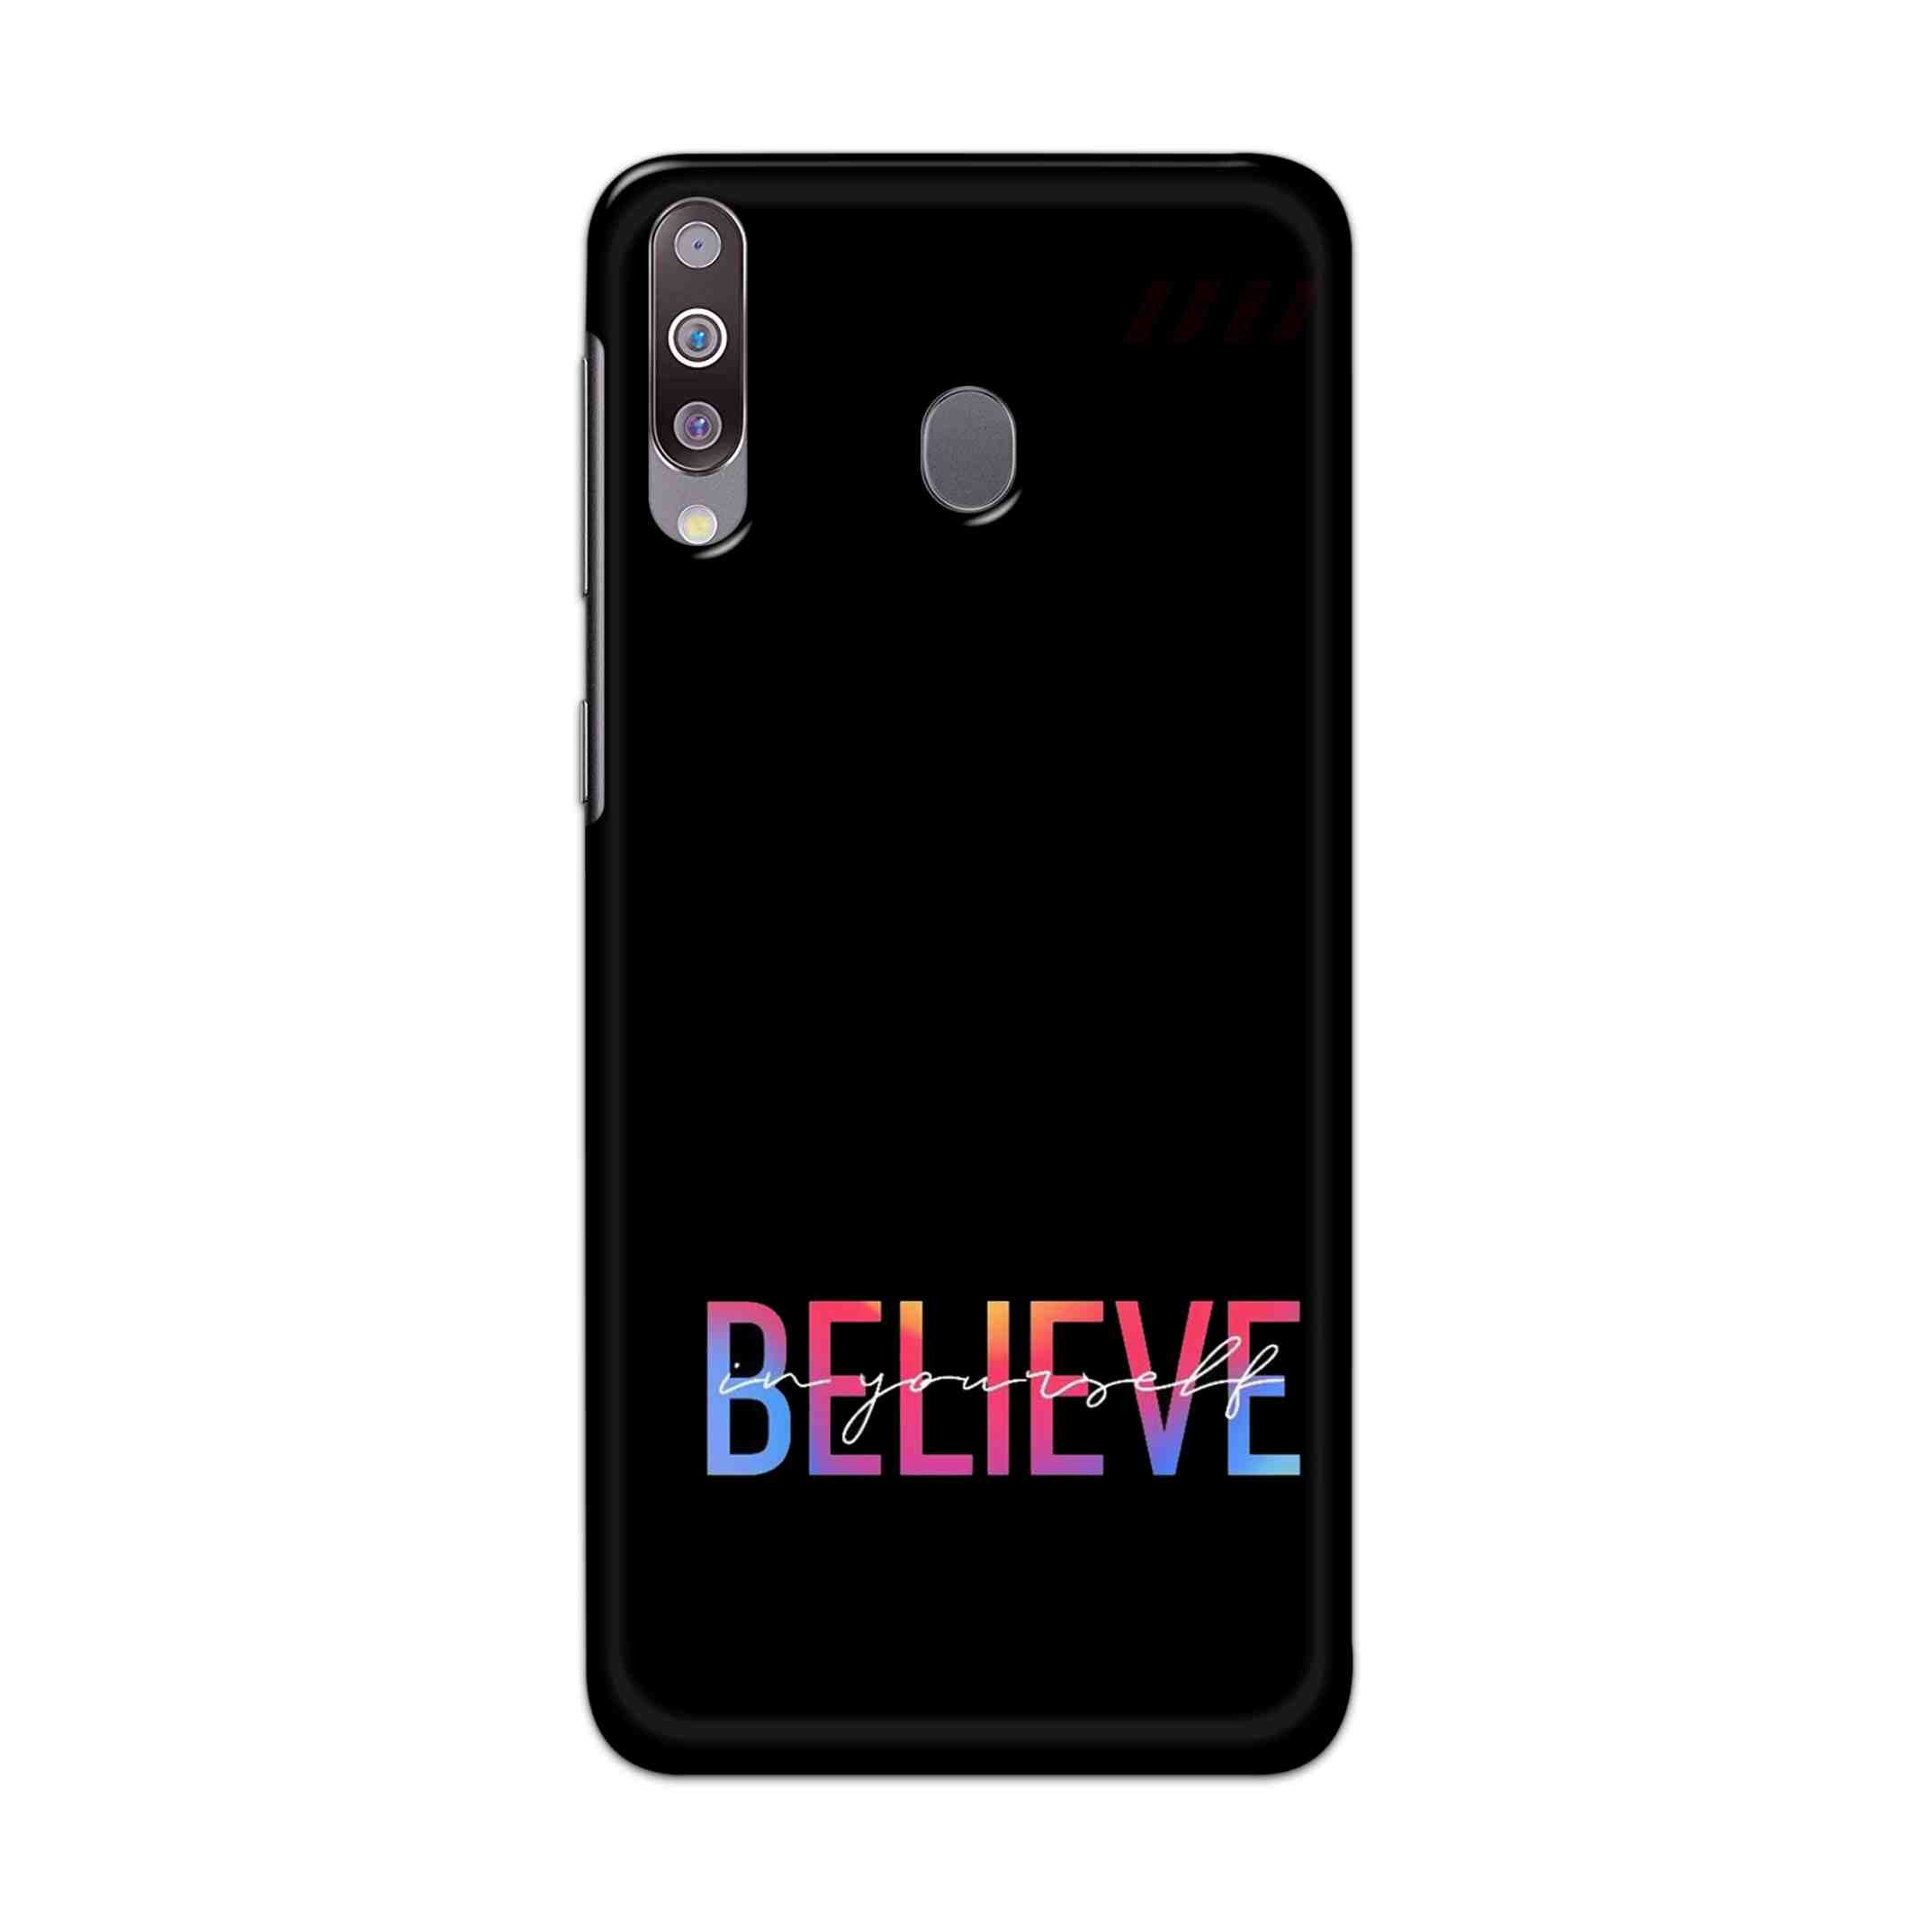 Buy Believe Hard Back Mobile Phone Case Cover For Samsung Galaxy M30 Online